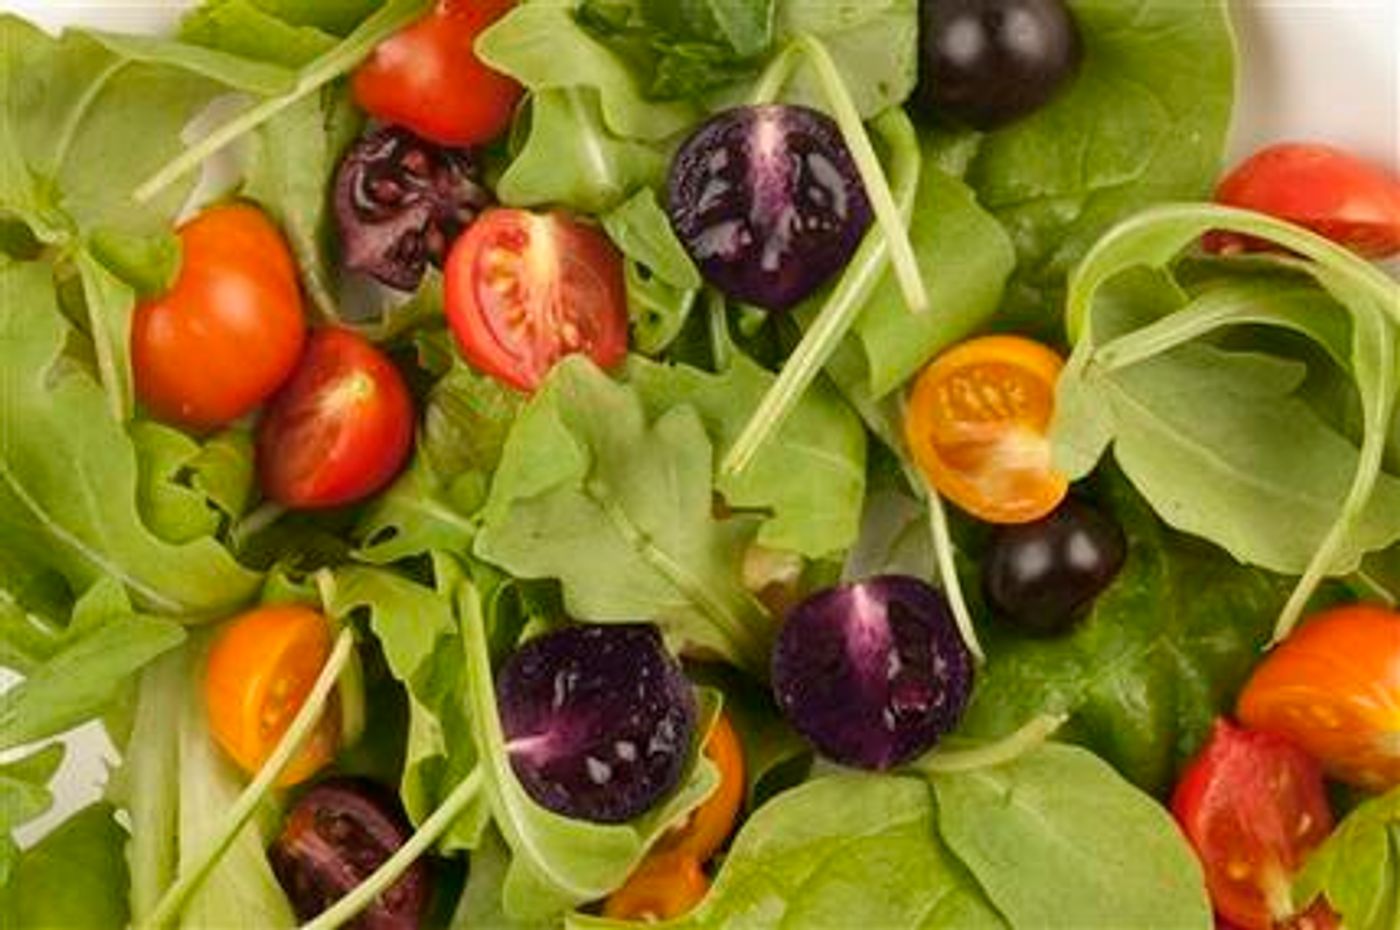 This image provided by The John Innes Centre, UK, shows a salad made with red and purple tomatoes. A small British company is planning to apply for U.S. permission to produce and sell purple tomatoes that have high levels of anthocyanins, compounds found in blueberries that some studies show lower the risk of cardiovascular disease and cancer. The Food and Drug Administration would have to approve any health claims used to sell the products. Cancer-fighting pink pineapples, heart-healthy purple tomatoes and less fatty vegetable oils may someday be on grocery shelves alongside more traditional products.